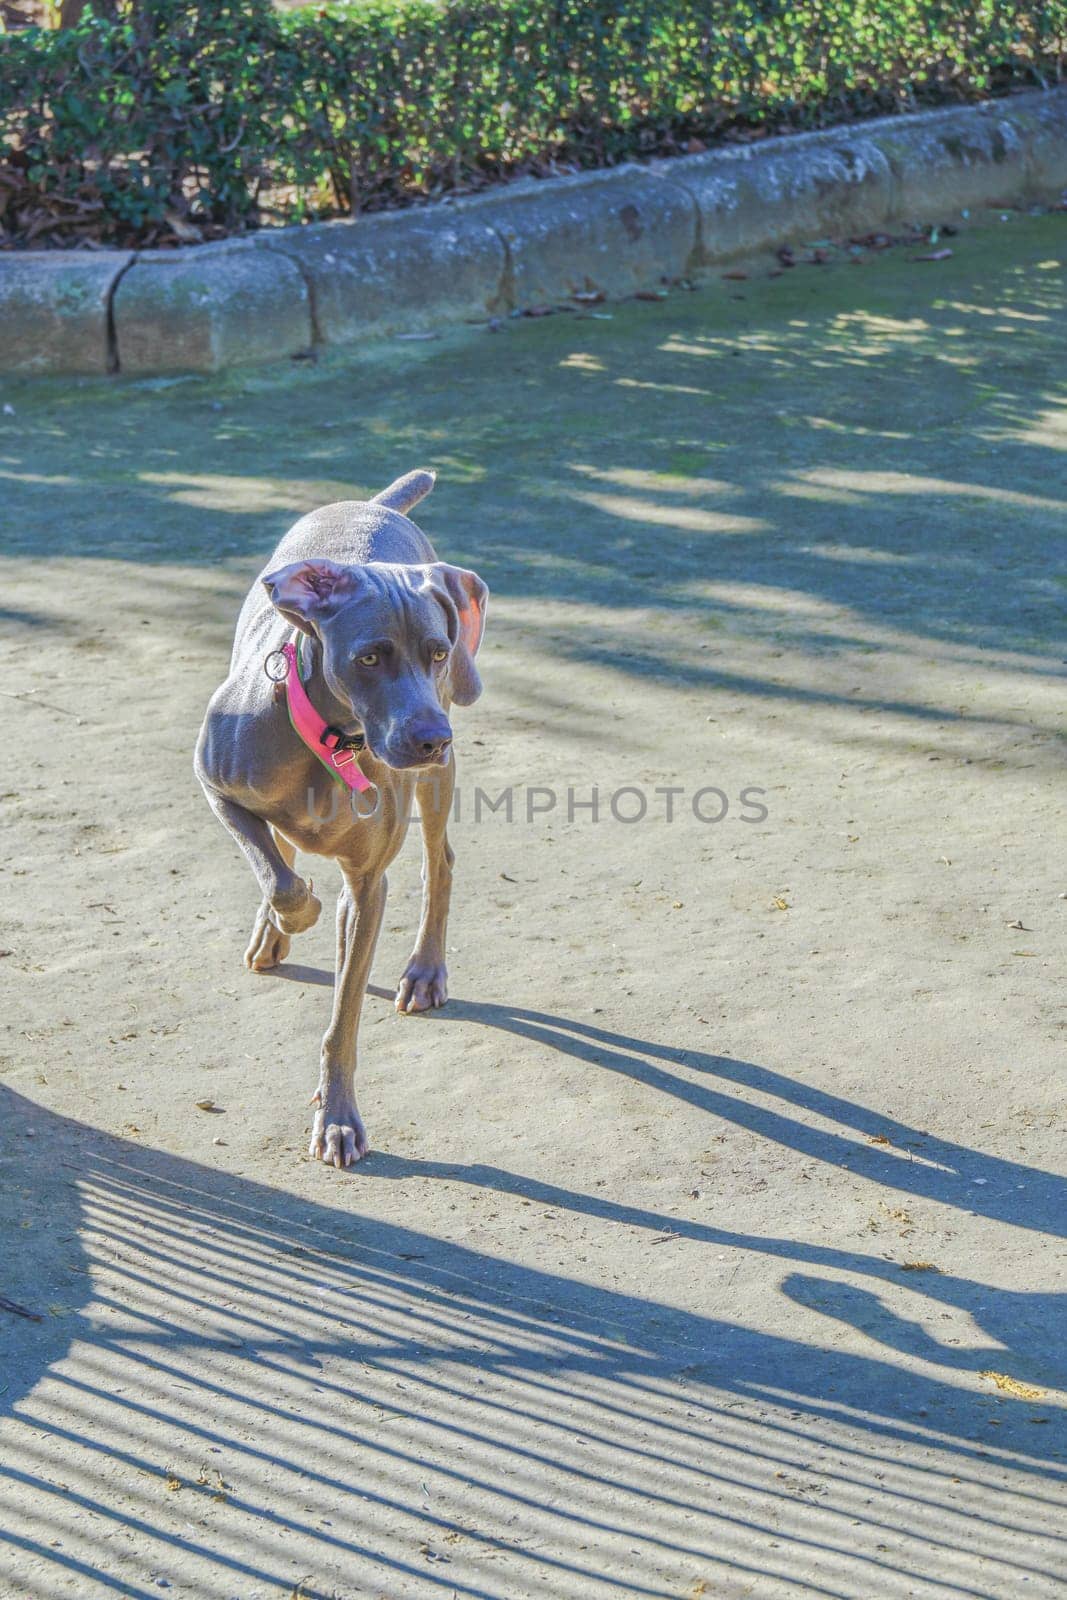 Weimaraner hunting dog illuminated by the sun in a park in hunting stance